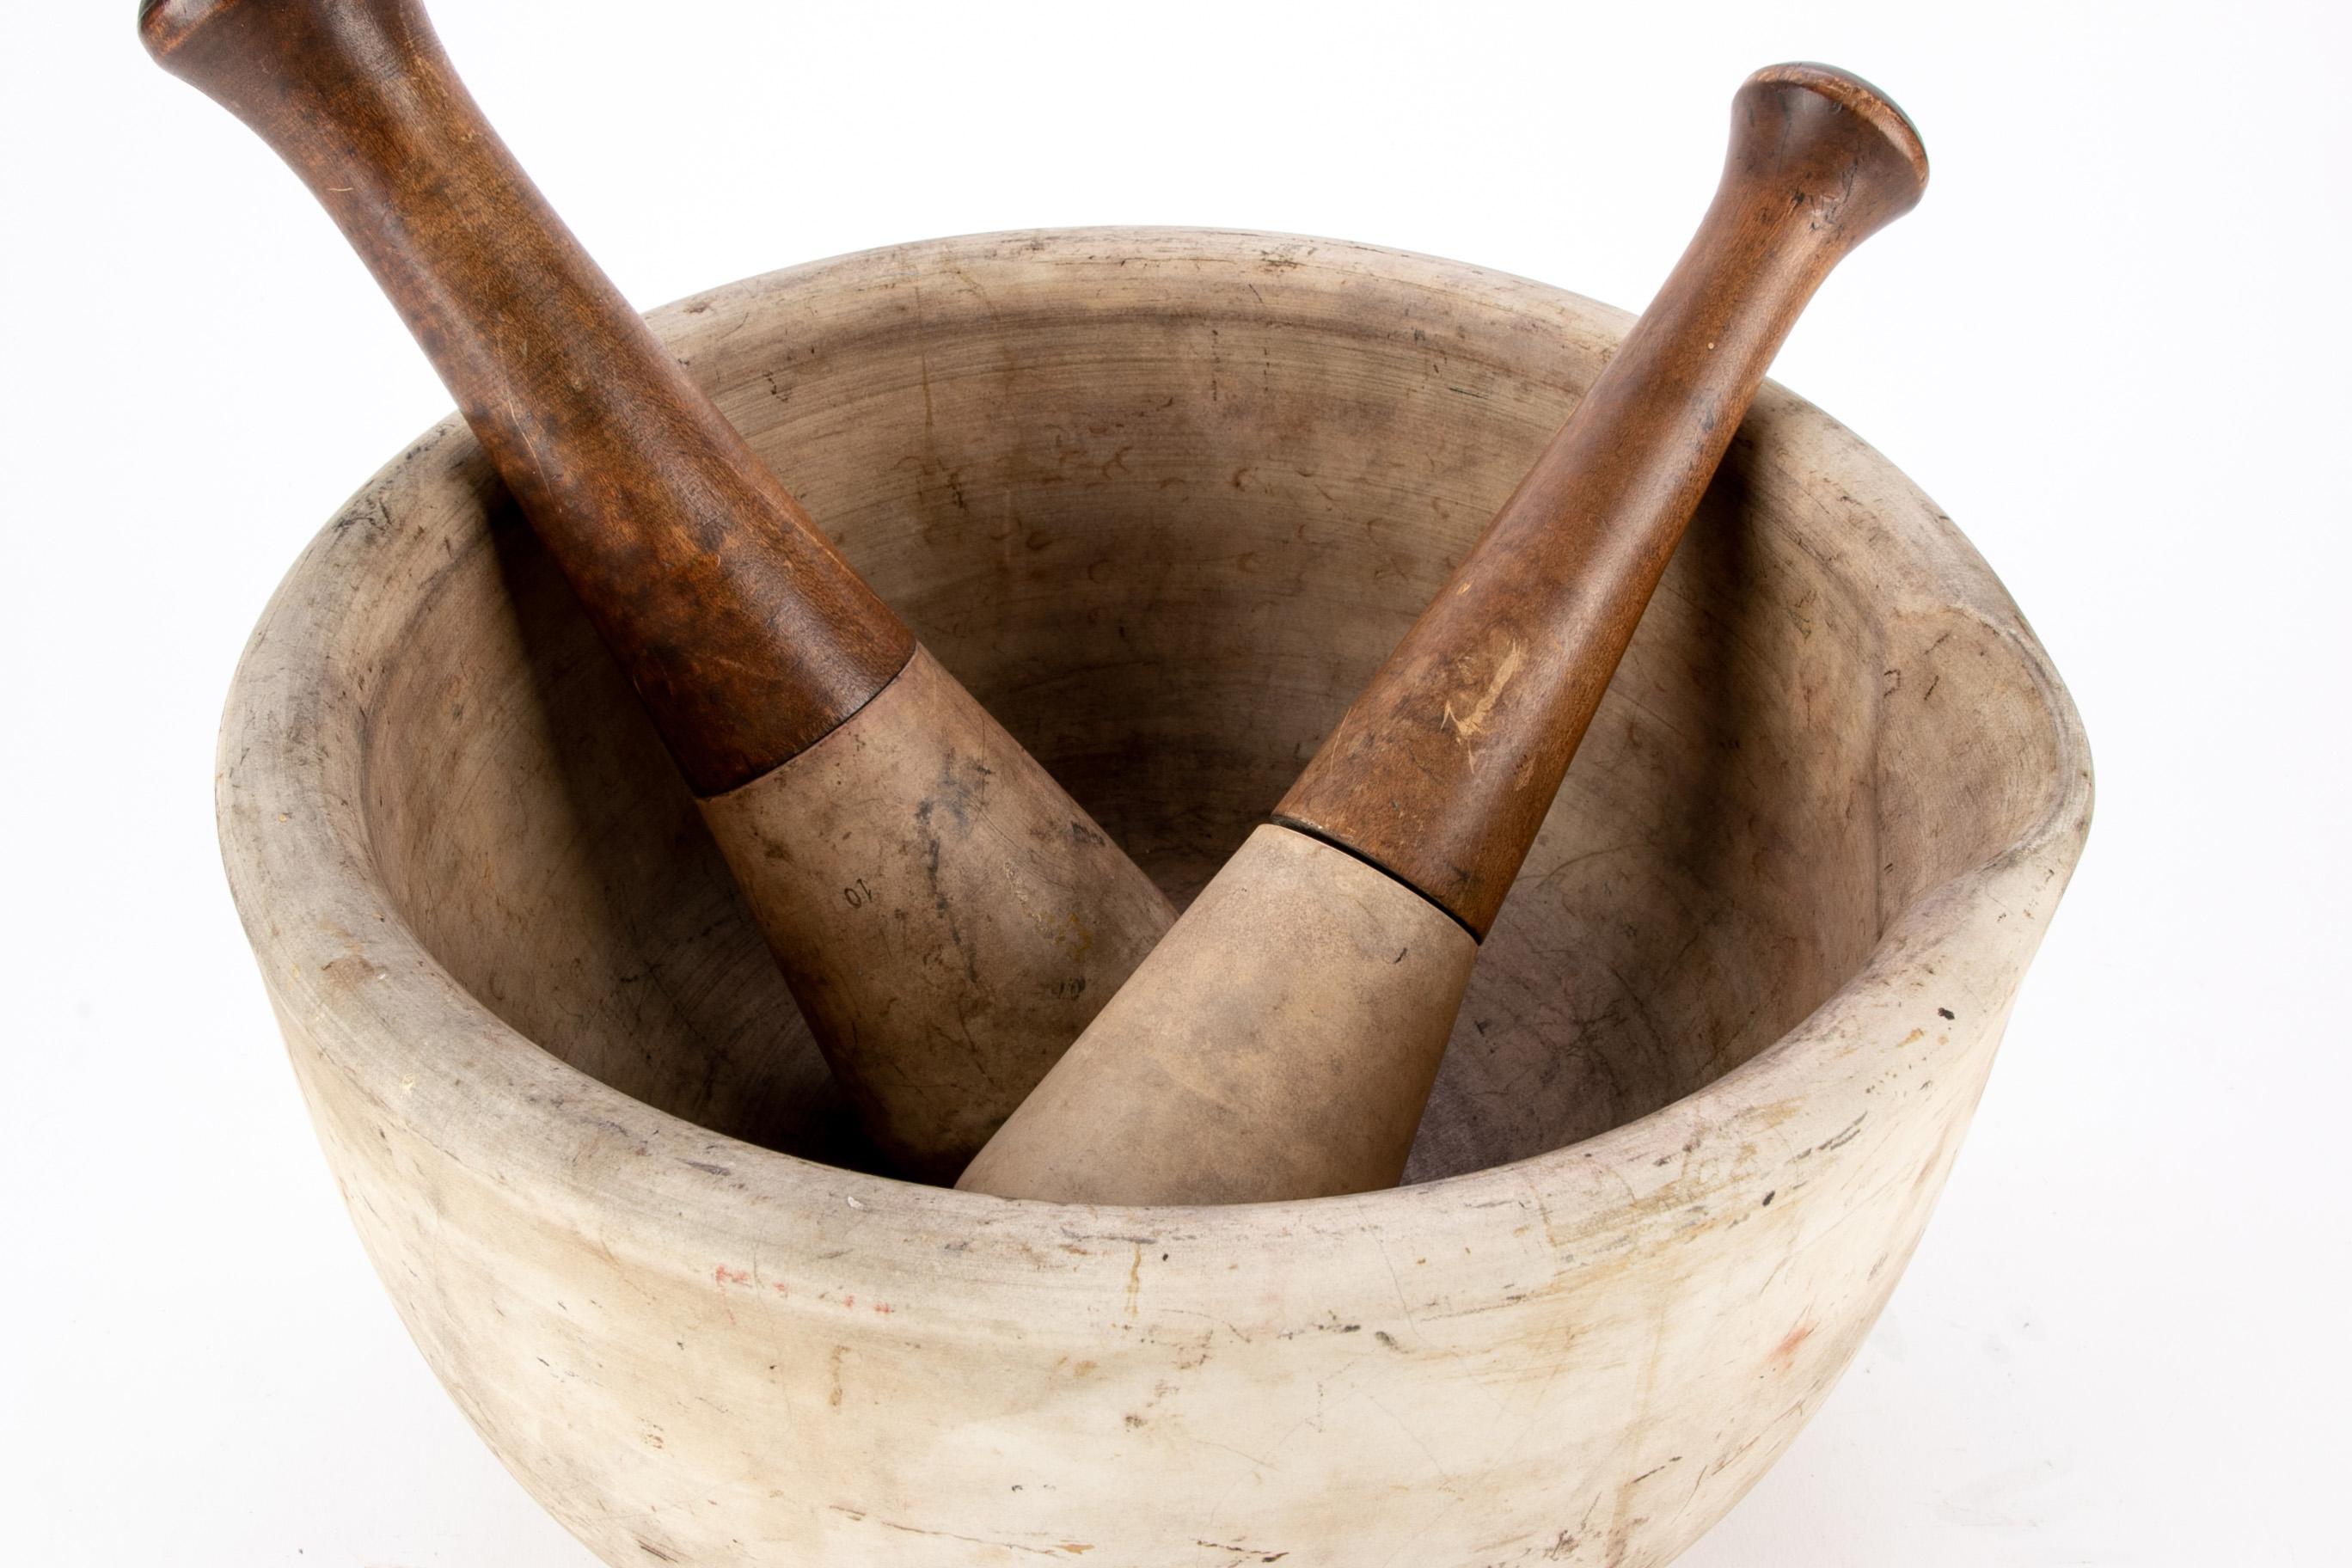 Large scale antique heavy ceramic mortar and two pestles along with two wooden handled ceramic pestles. Larger pestle L. 11 1/2